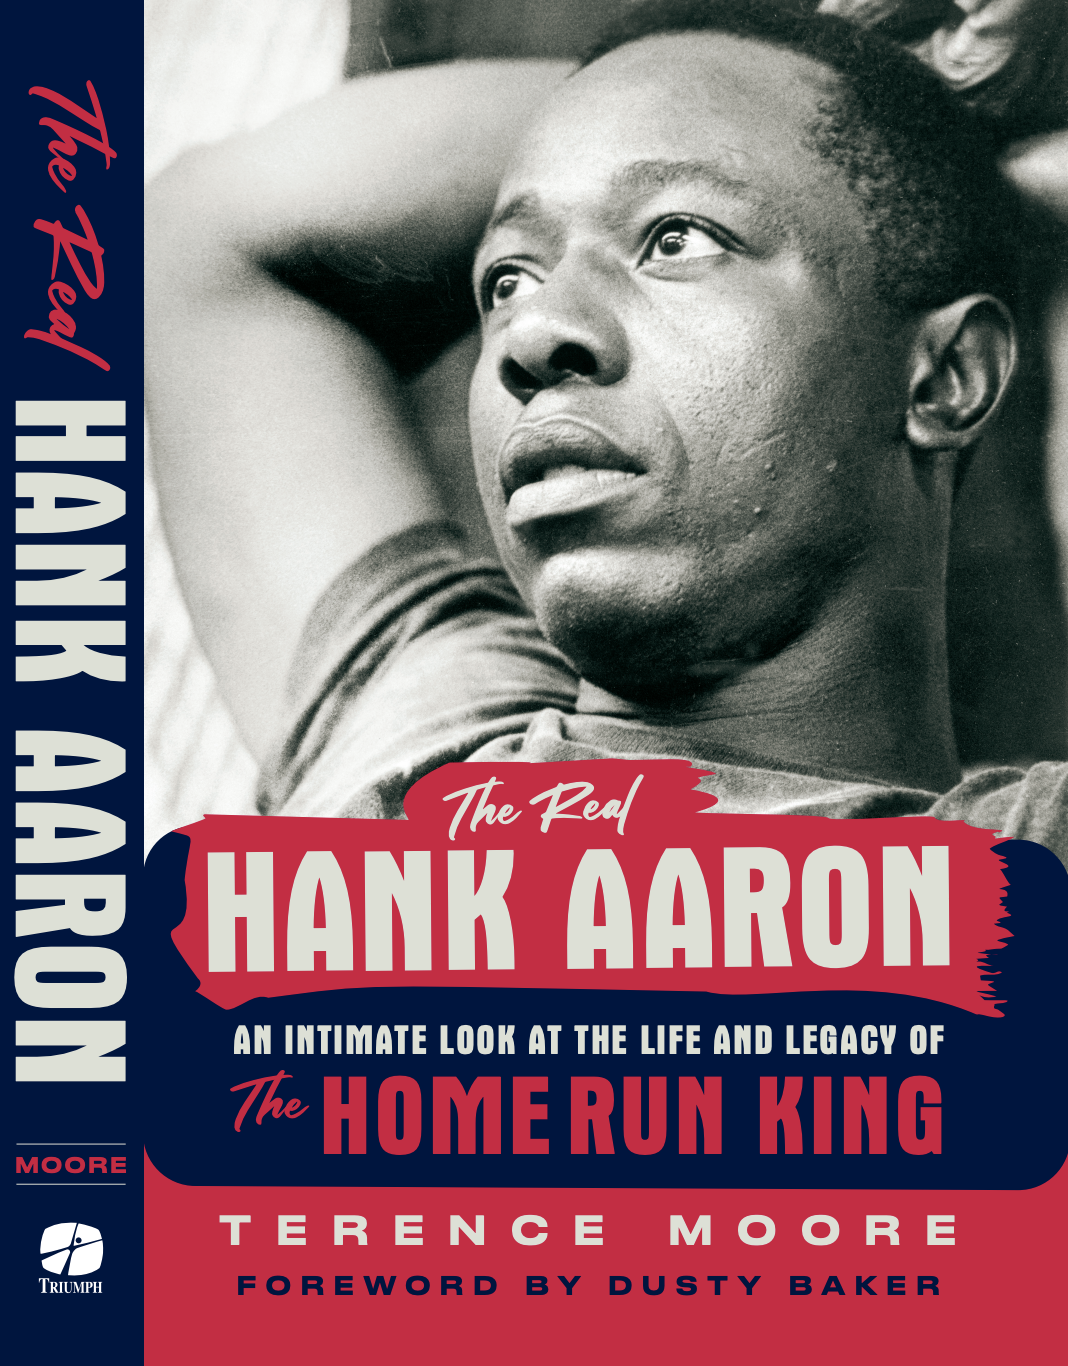 Autographed copy by the author of The Real Hank Aaron